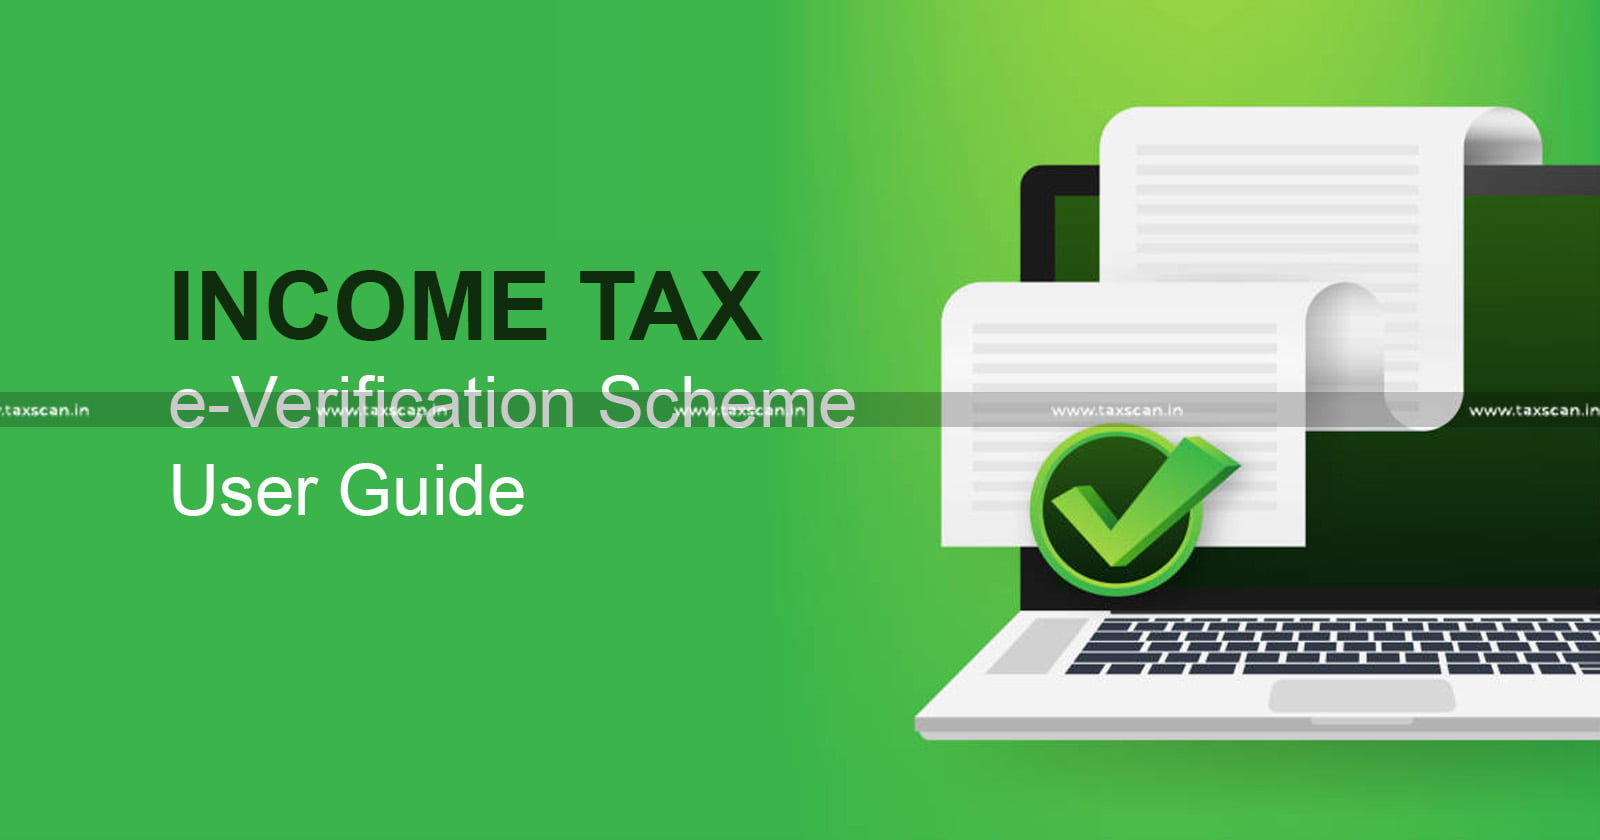 User Guide - Income Tax Department - Response to Notices and Letters - Notices and Letters - e-Verification Scheme - taxscan